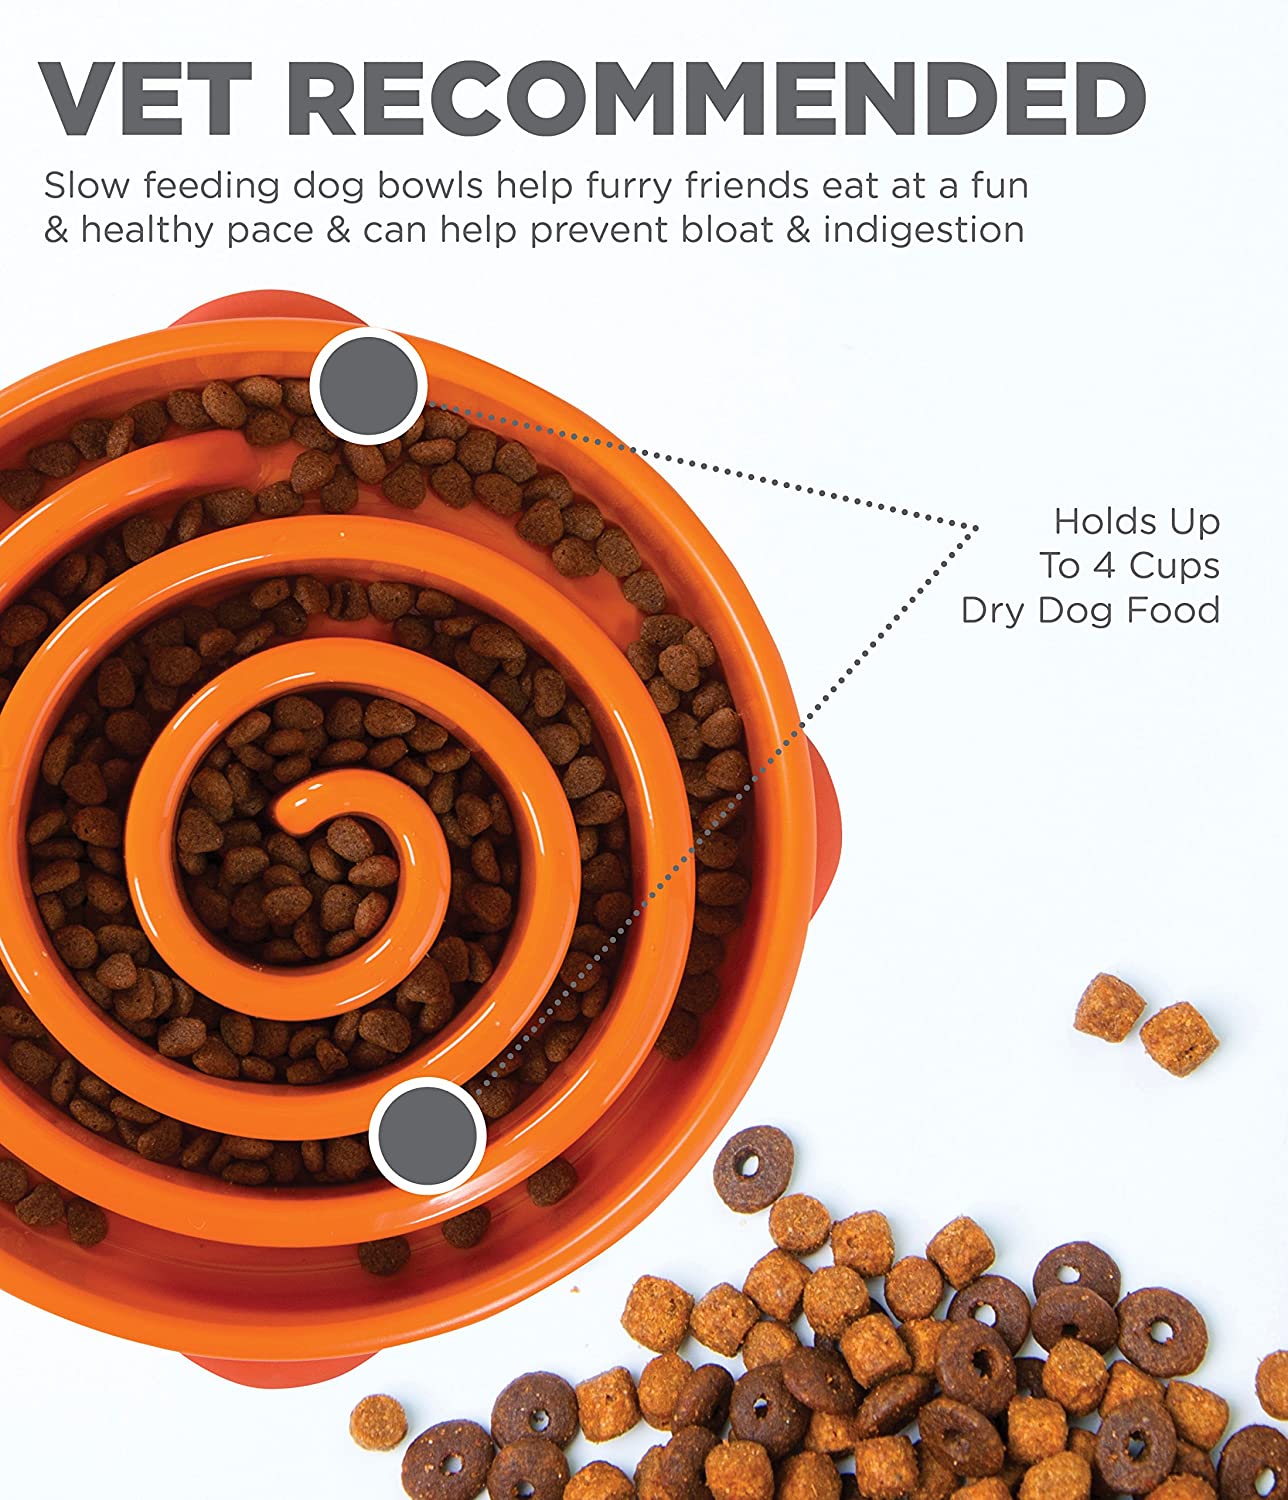 An orange round slow feeder dog bowl with food in the slow feeder